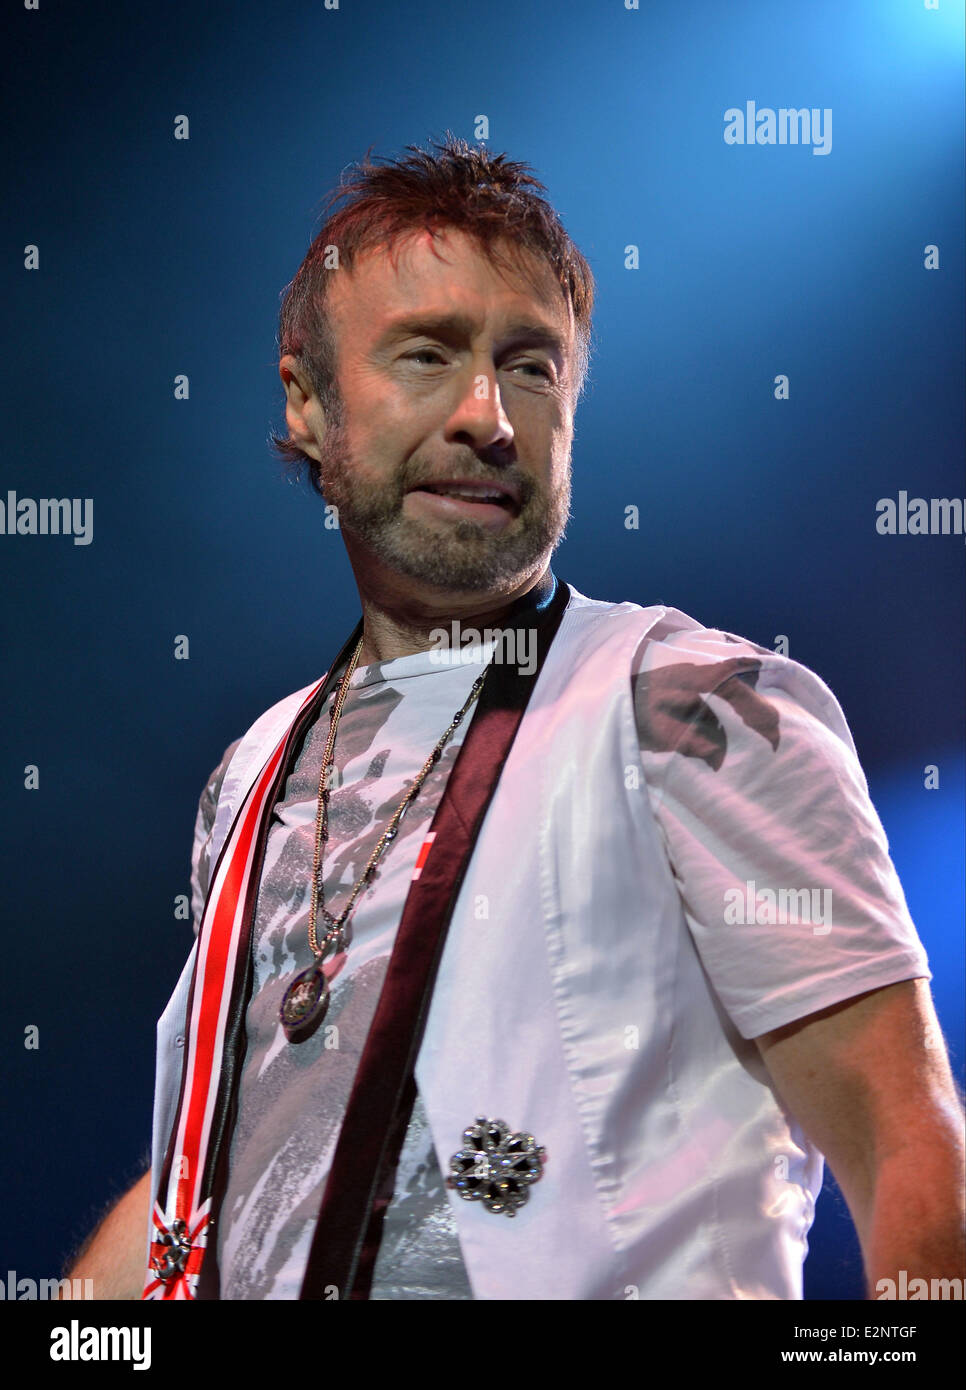 Paul Rodgers performing with his band at Hard Rock Live in Hollywood  Featuring: Paul Rodgers Where: Hollywood, Florida, United Stock Photo